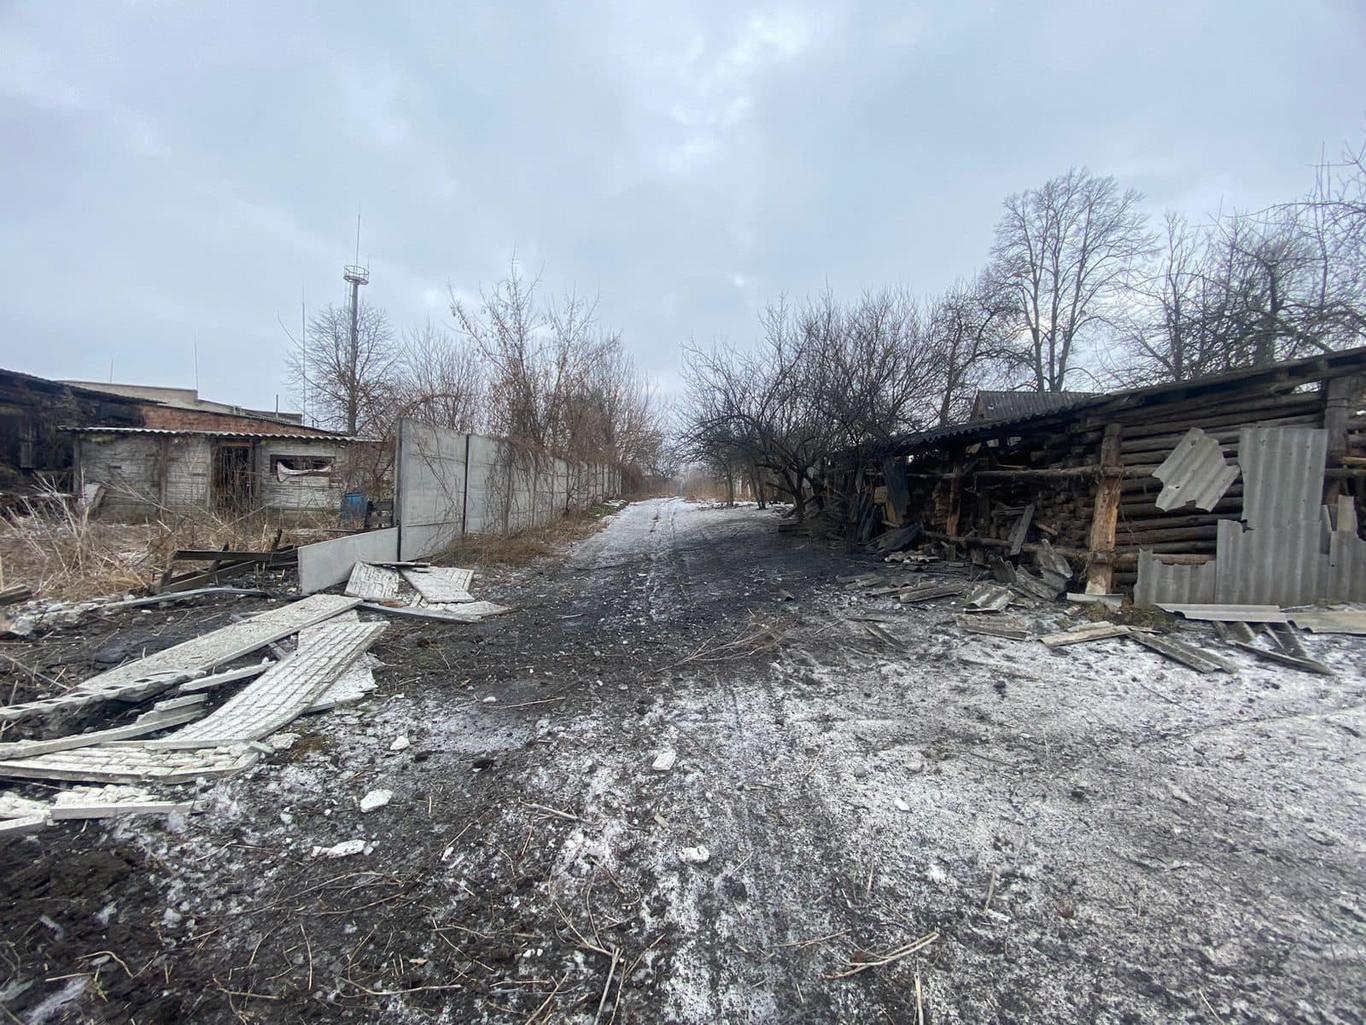 Over the past day, Russians have shelled more than 15 settlements in the Kharkiv region